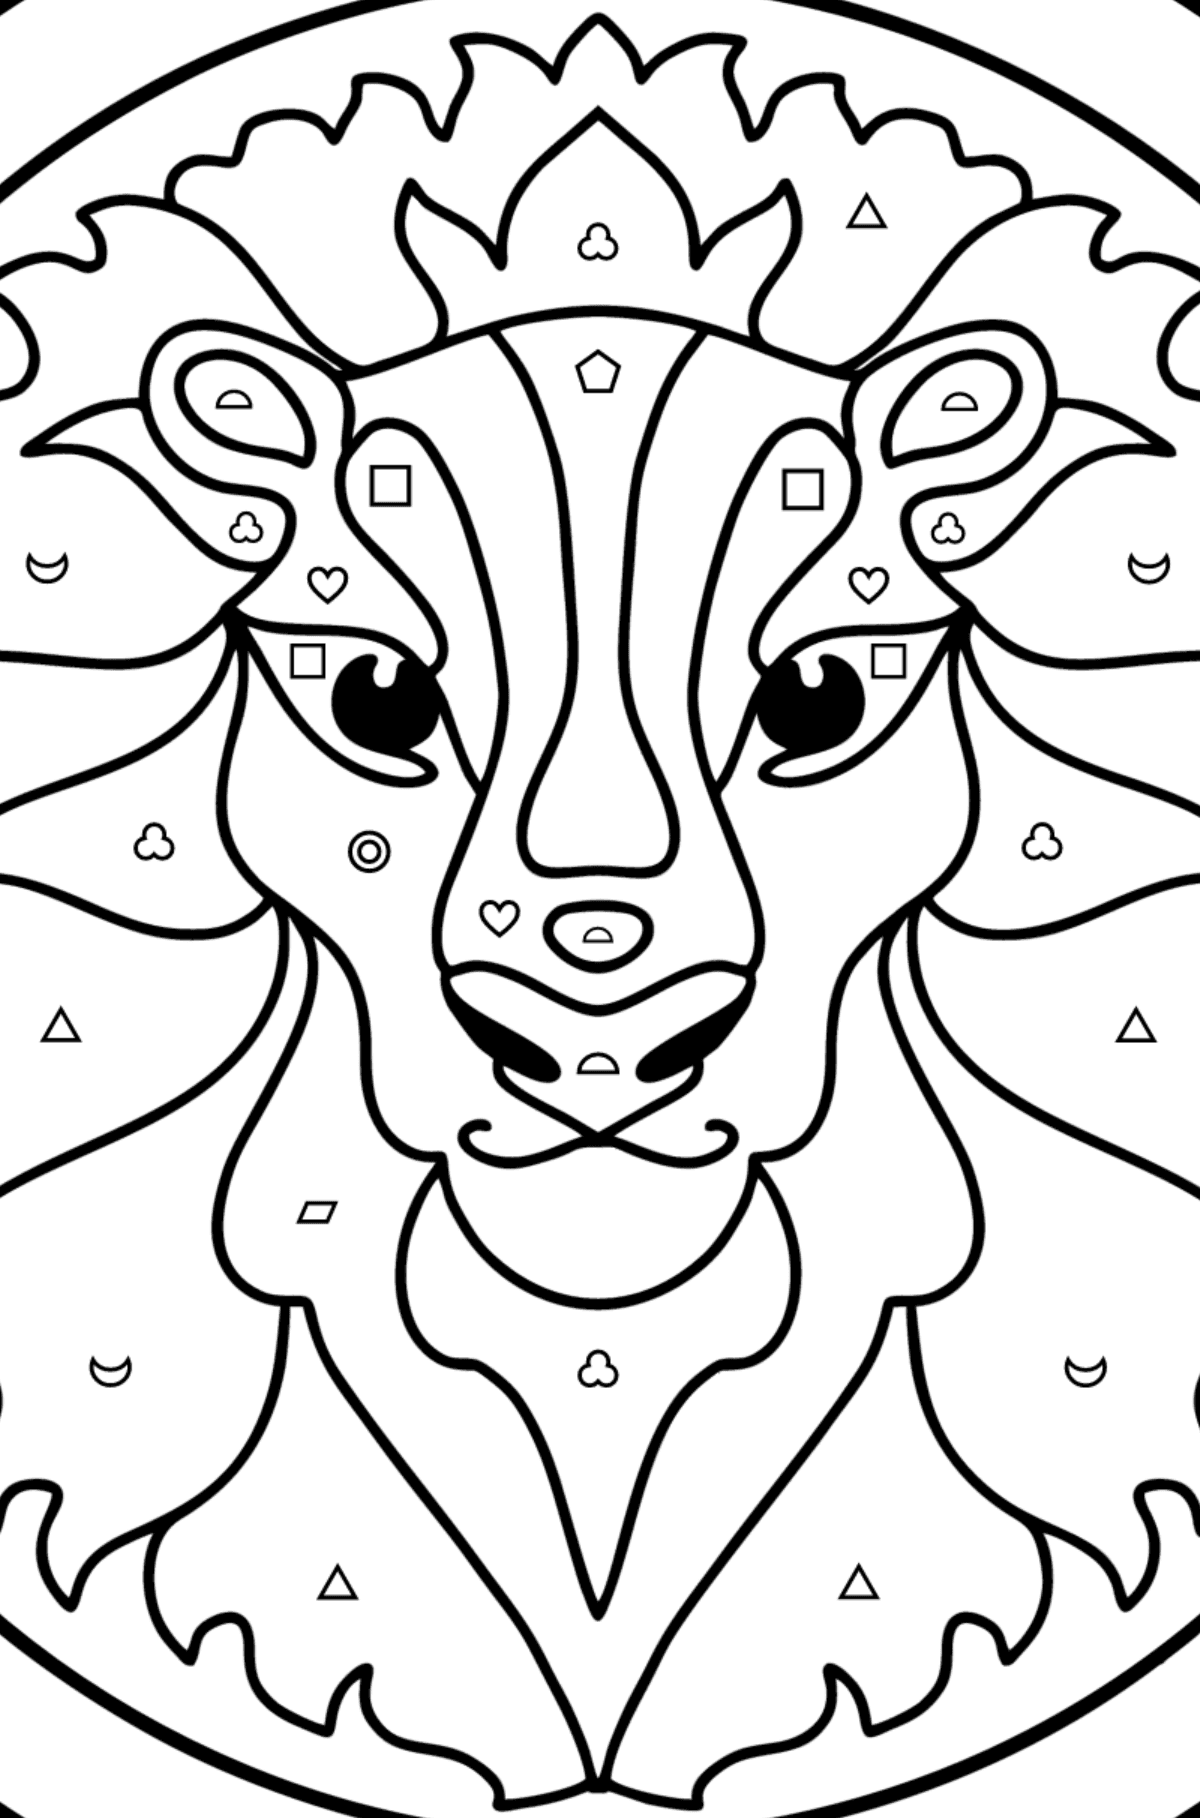 Coloring page for kids - zodiac sign Leo - Coloring by Geometric Shapes for Kids